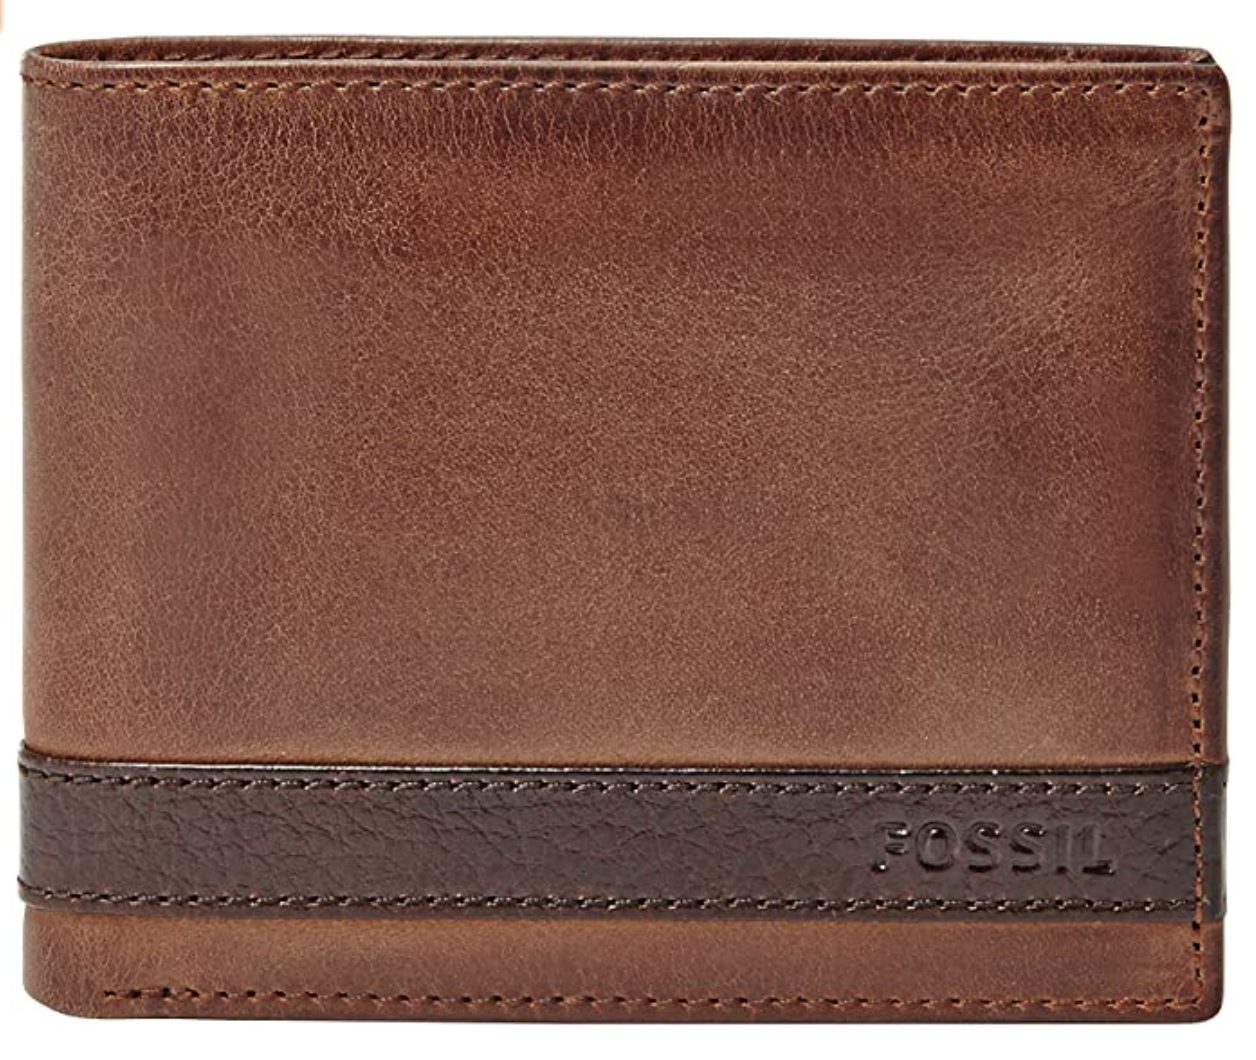 christmas gift ideas for him - wallet